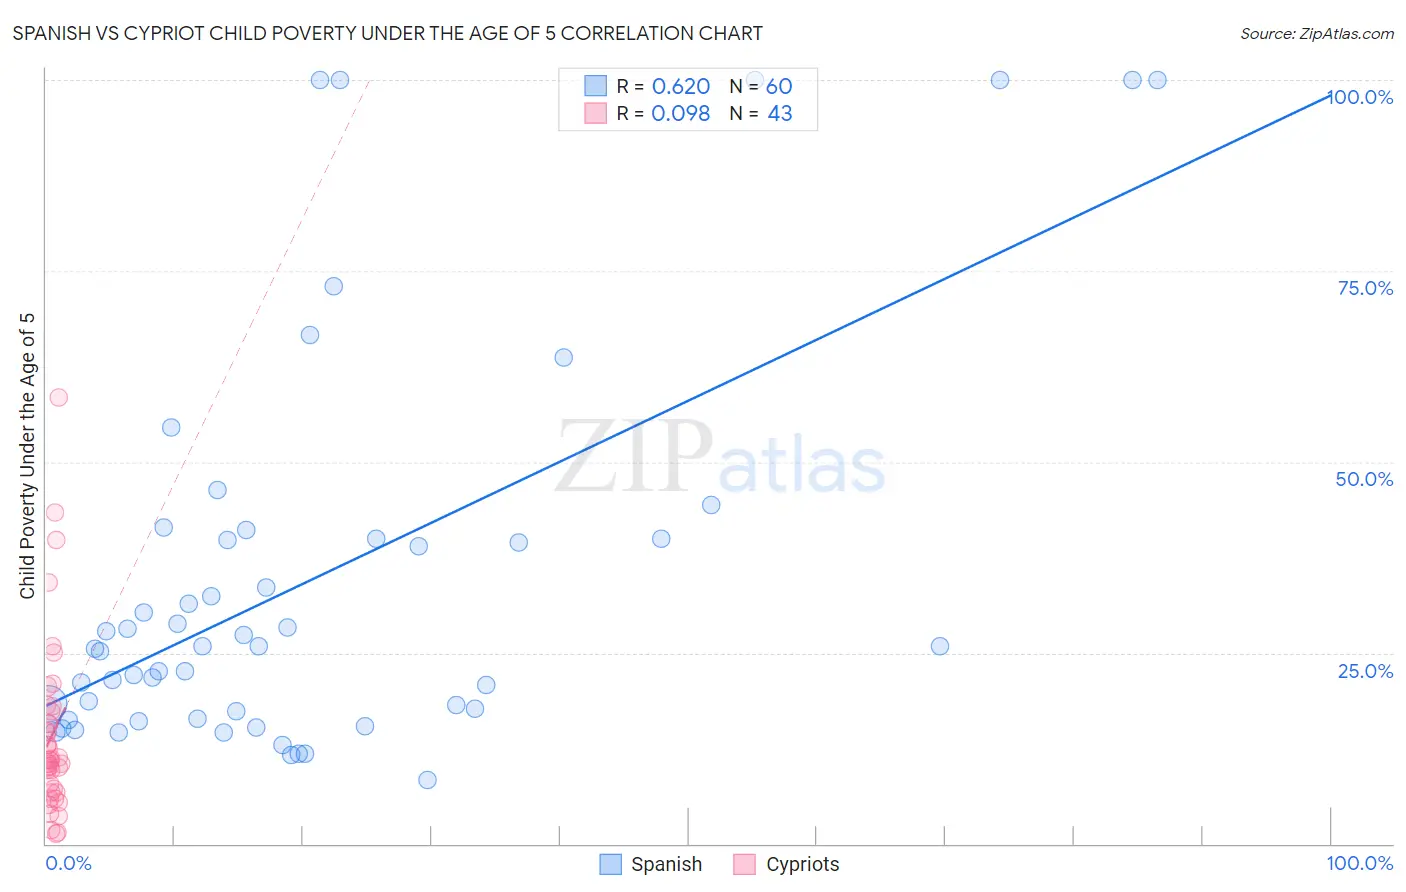 Spanish vs Cypriot Child Poverty Under the Age of 5